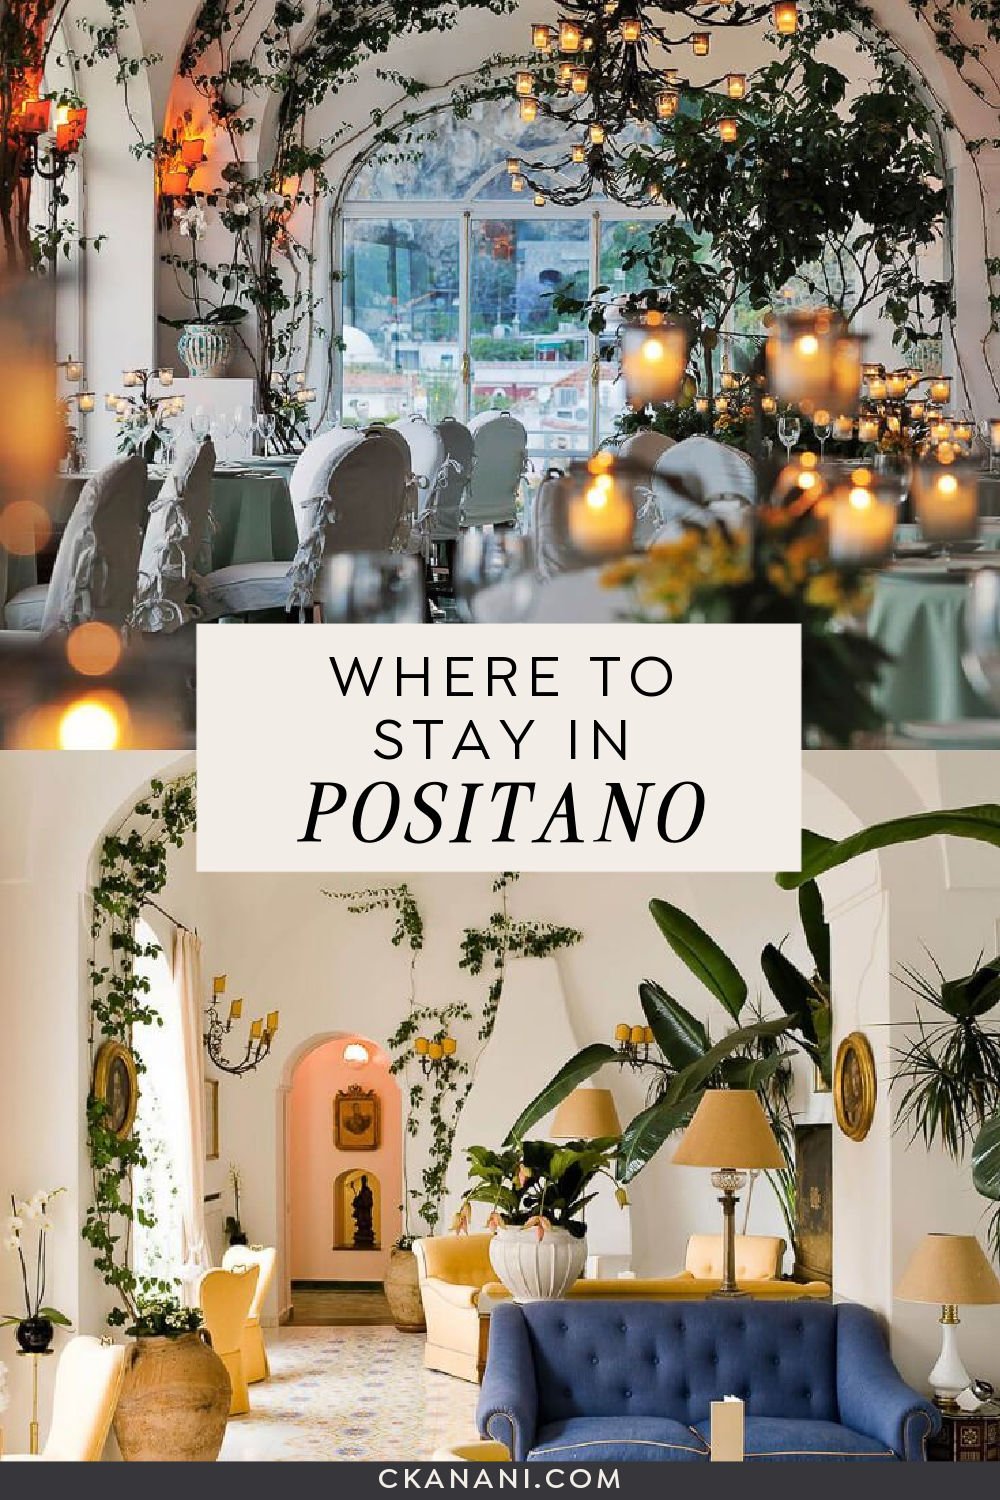 Wondering where to stay in Positano? Here are the best options including luxury hotels, hotels with pool, the best views, restaurants, and more! Positano travel tips, Positano vacation, Positano guide